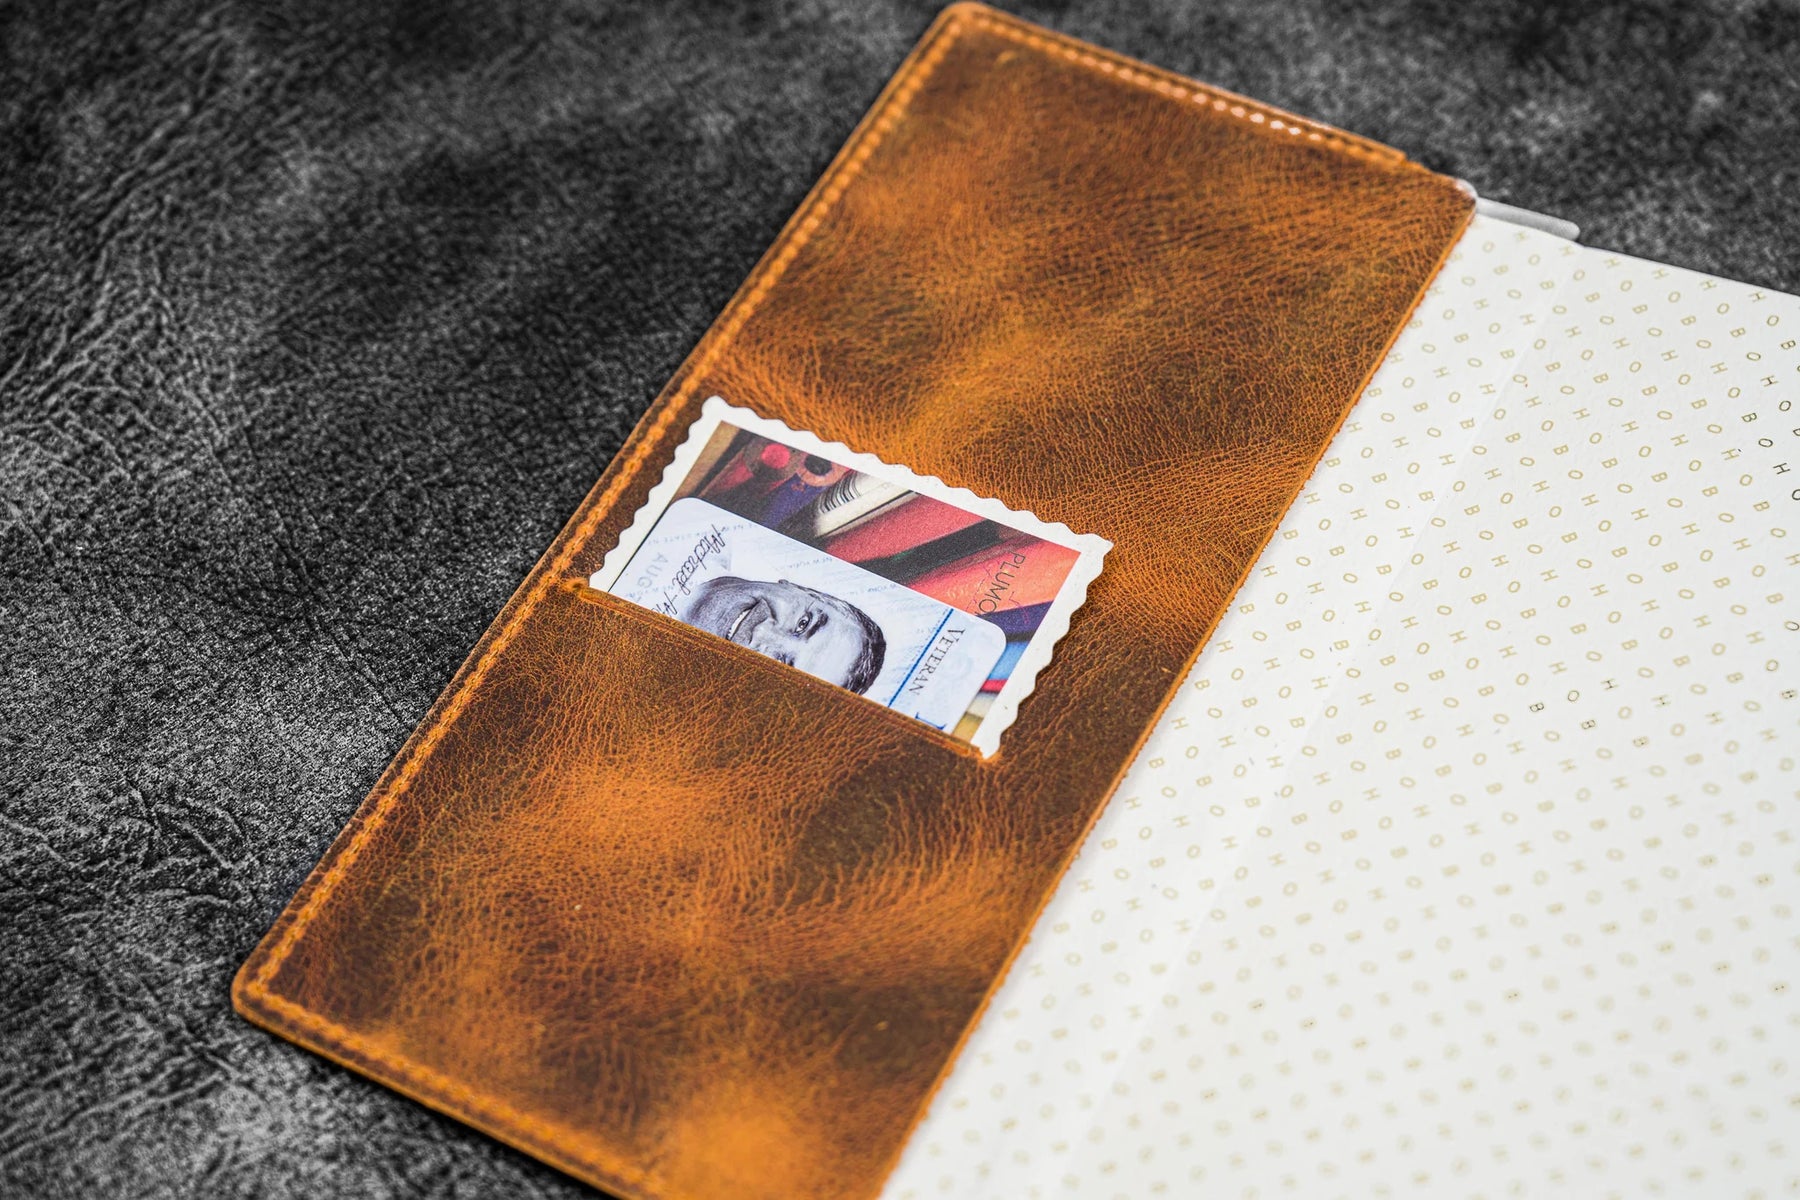 Galen Leather Slim Hobonichi Weeks Planner Cover- Crazy Horse Brown